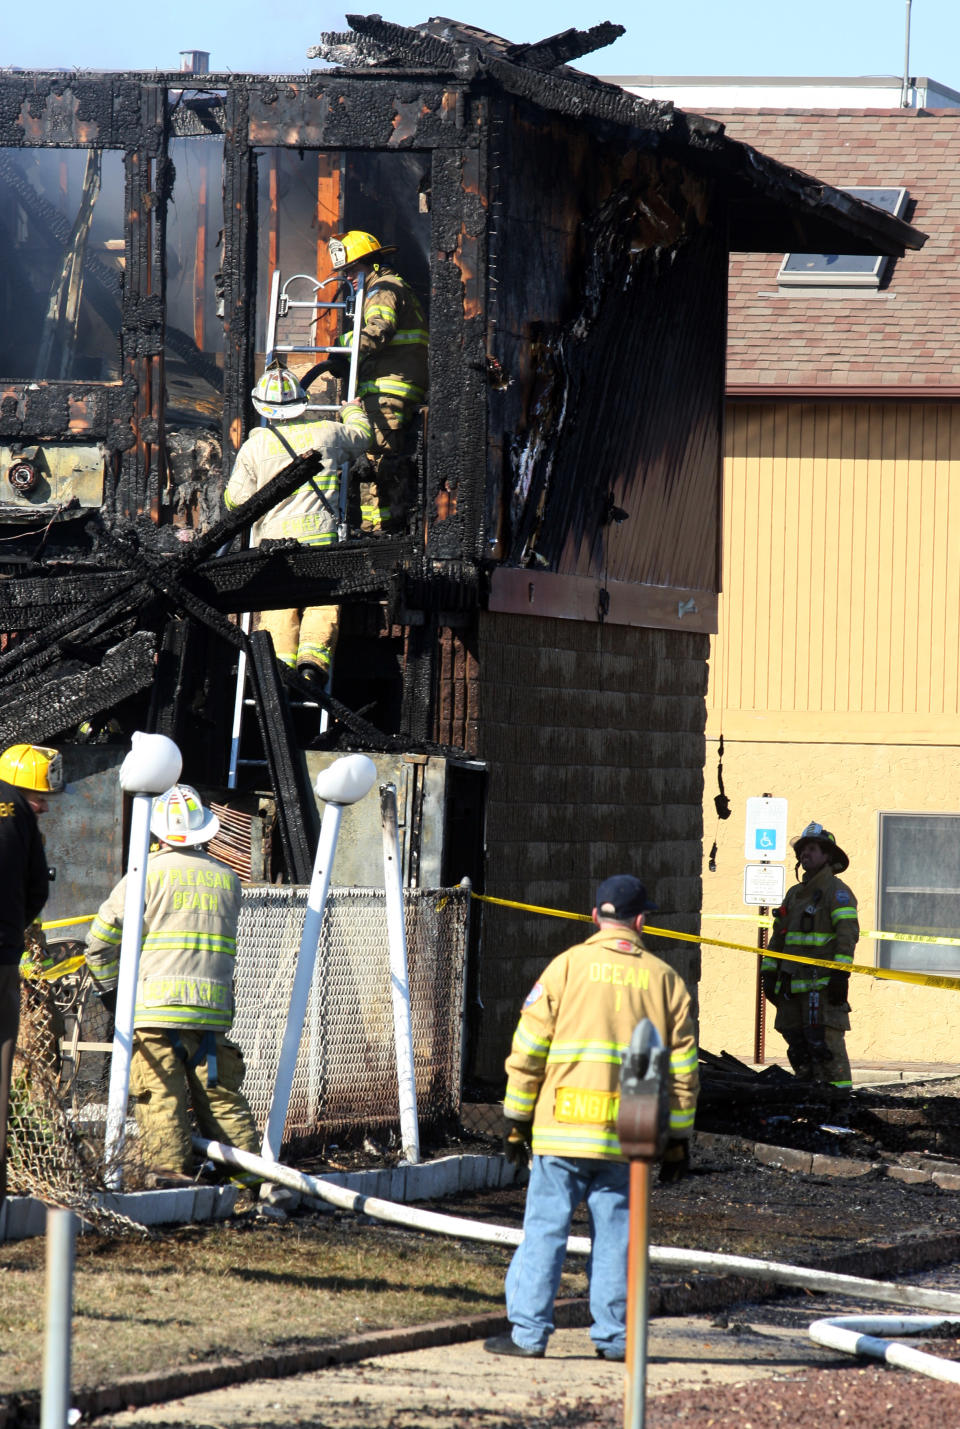 Firefighters investigate an early morning fire at the Mariner's Cove Hotel in Point Pleasant Beach, N.J. on Friday, March 21, 2014. (AP Photo/David Gard)